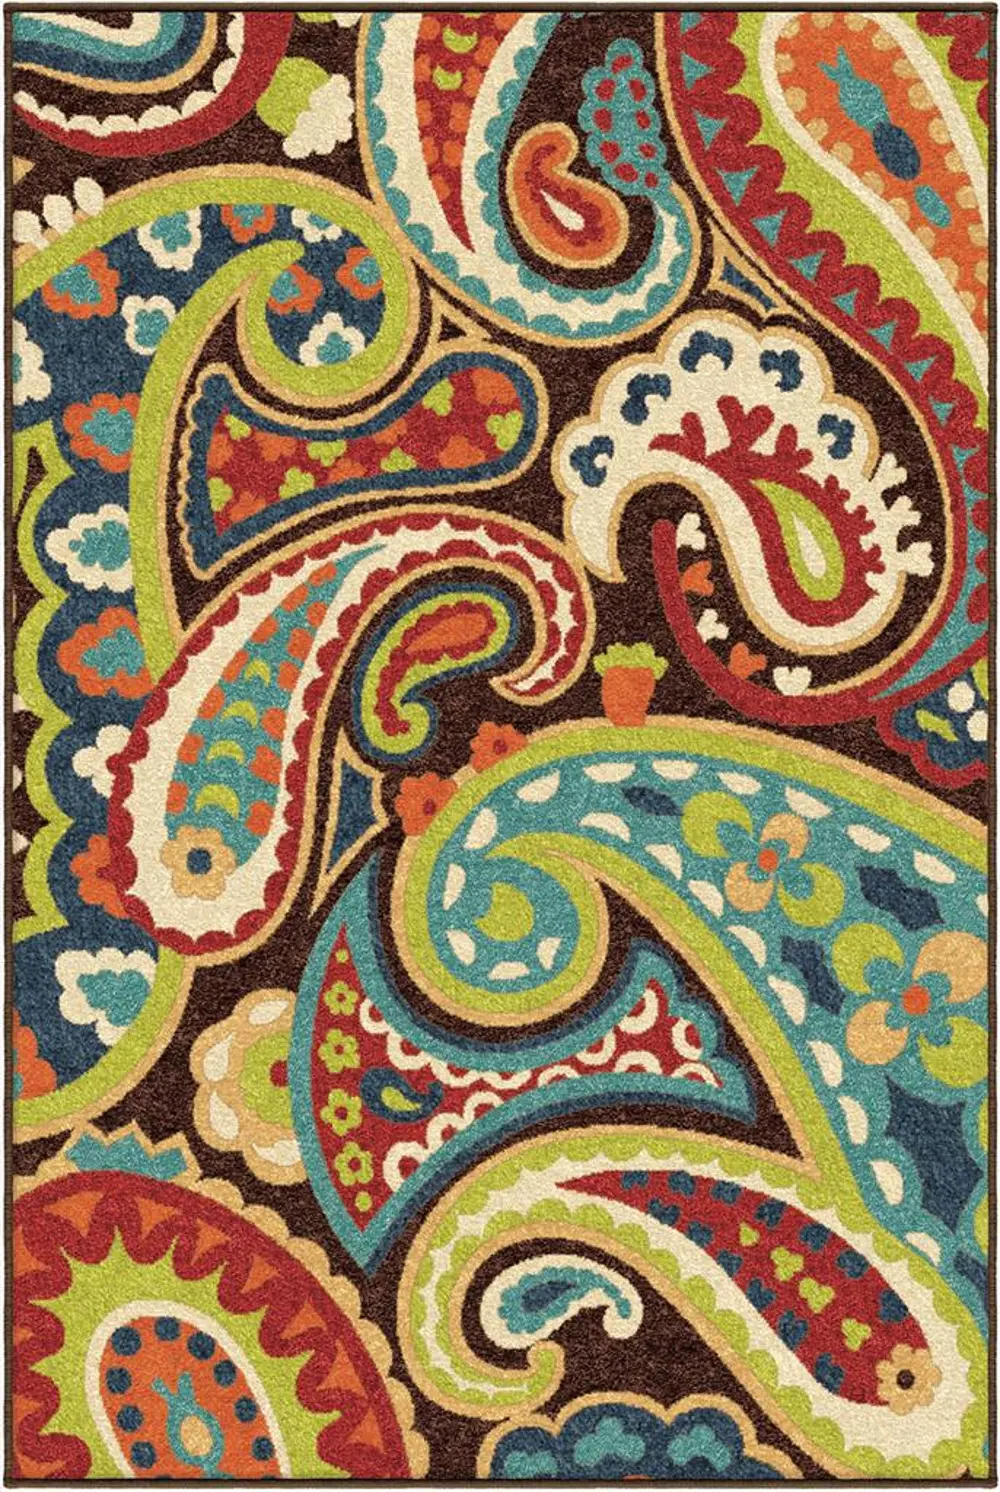 PAISLEY/2305....7 8 x 11 Large Brown, Turquoise, and Red Area Rug - Paisley-1